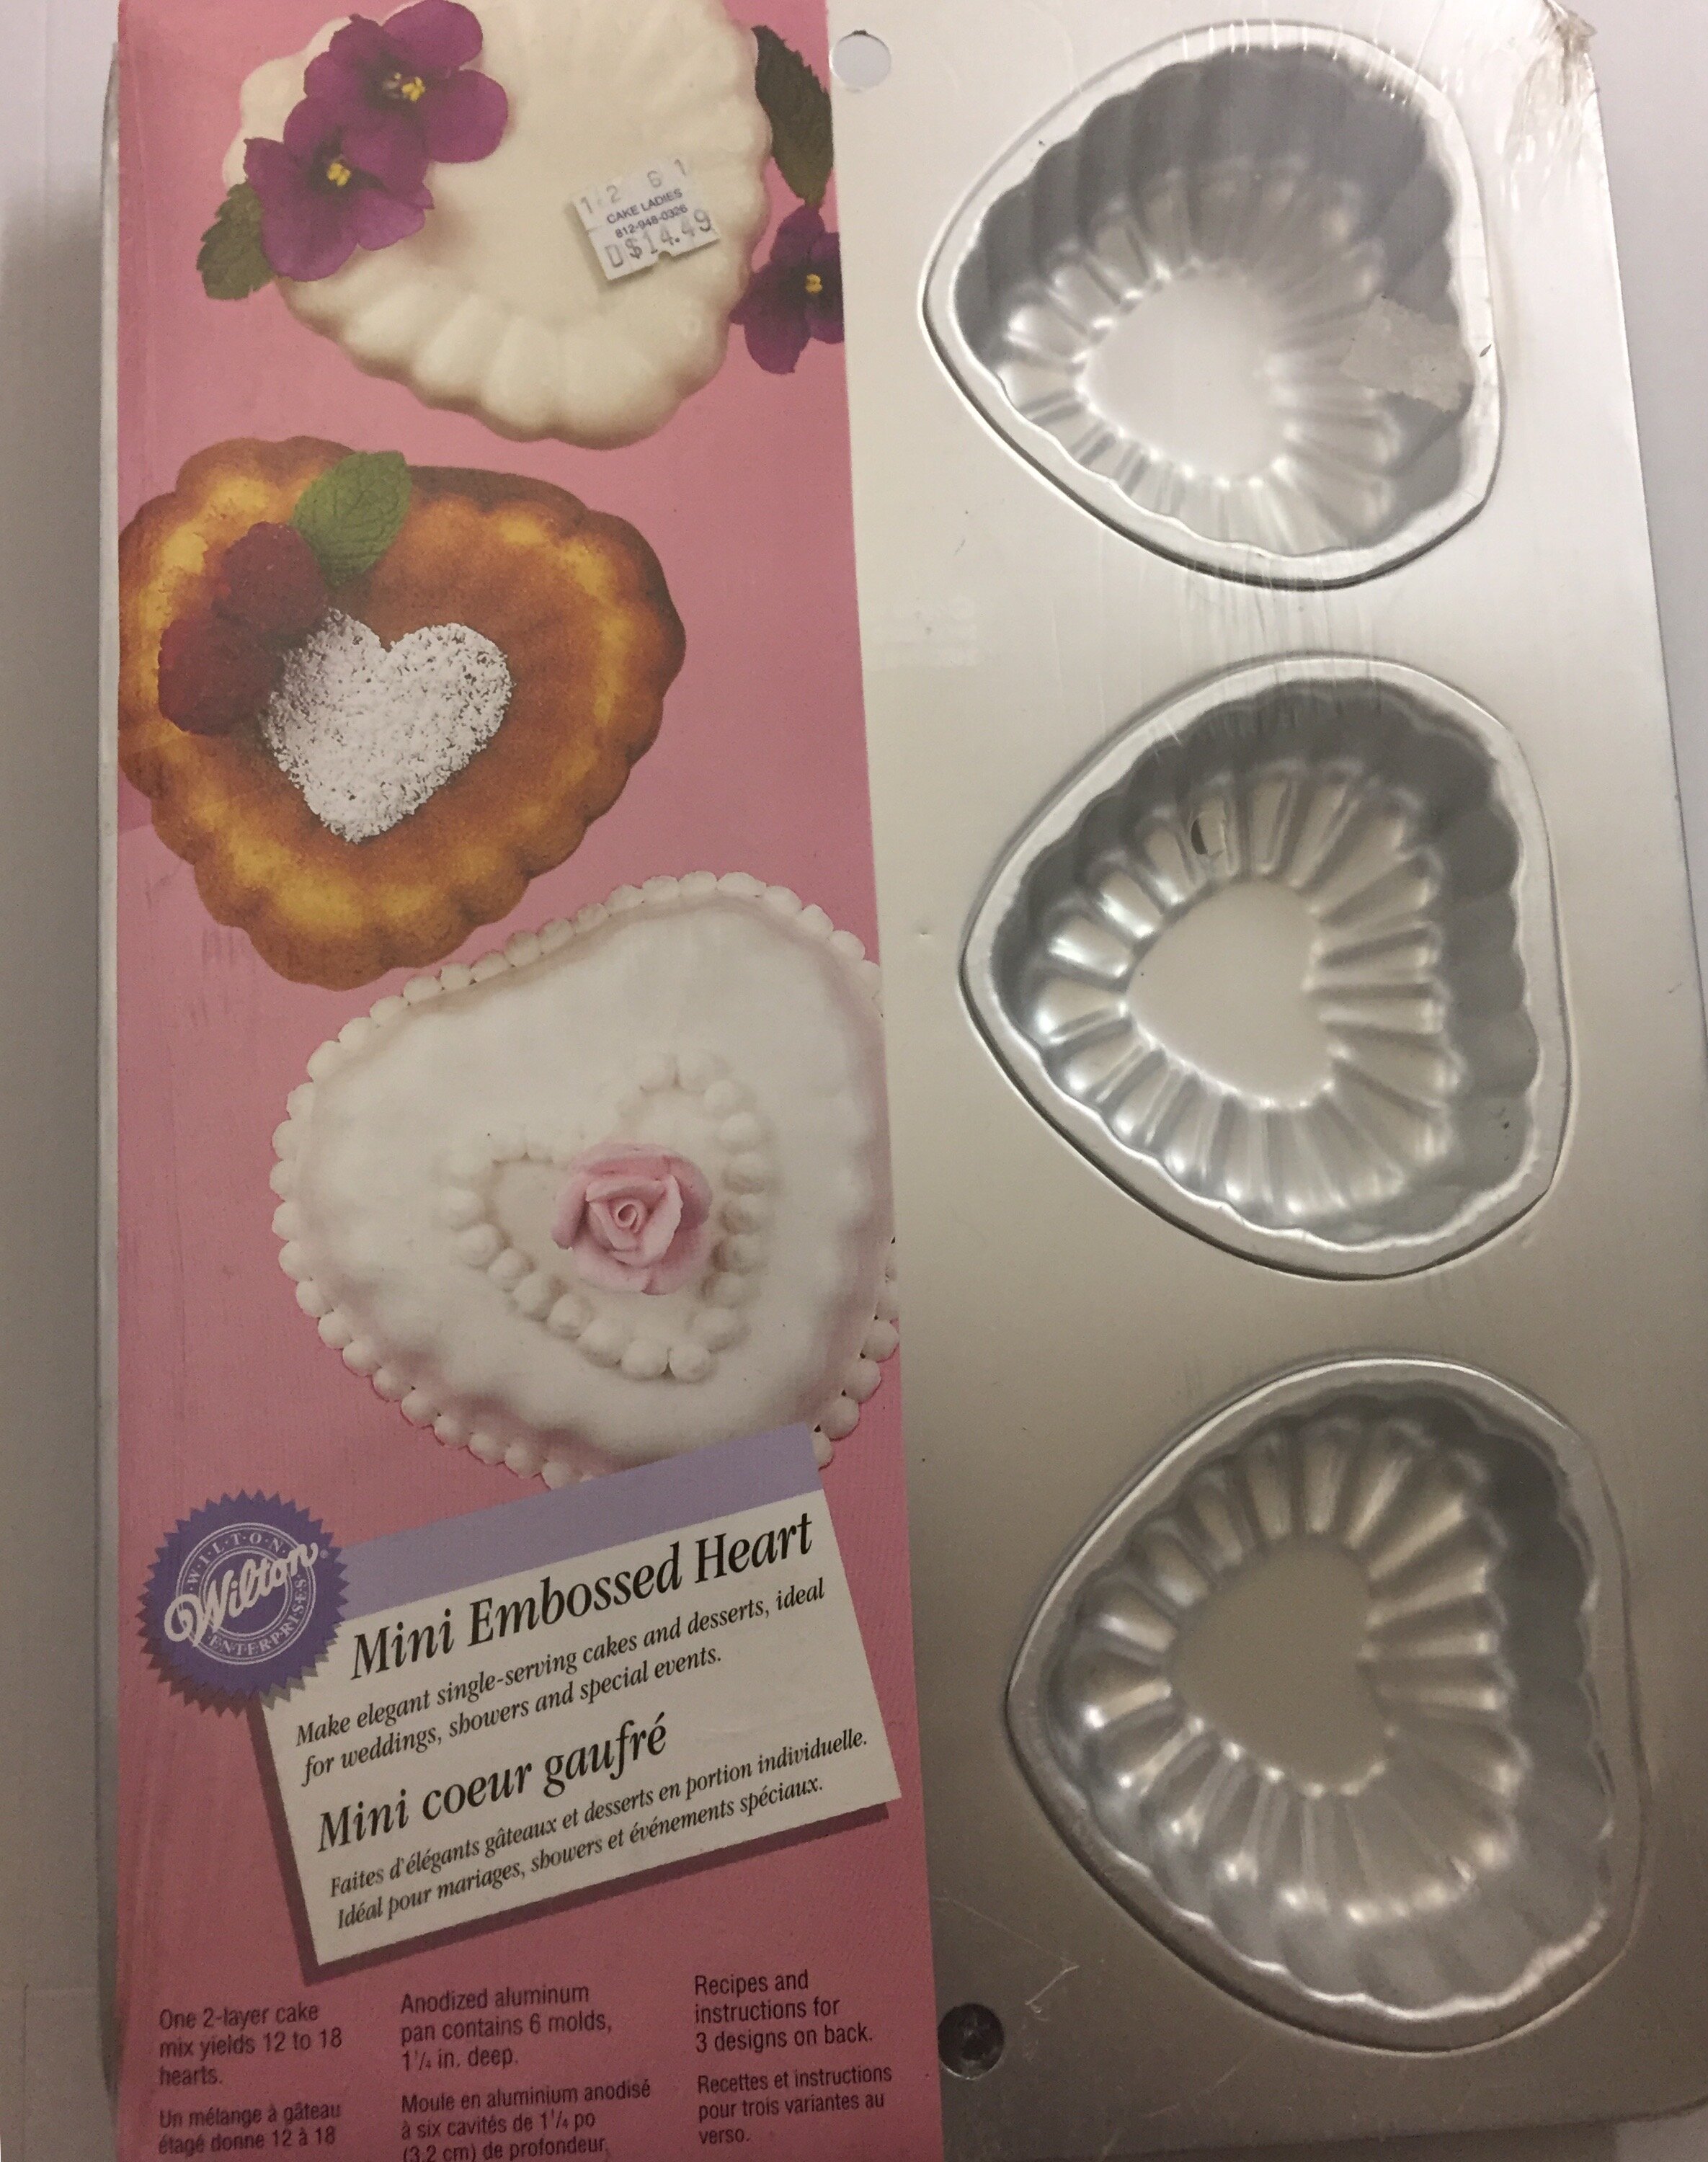 Wilton 6 Cavity Mini Silicone Heart Shaped Cookie and Candy Mold